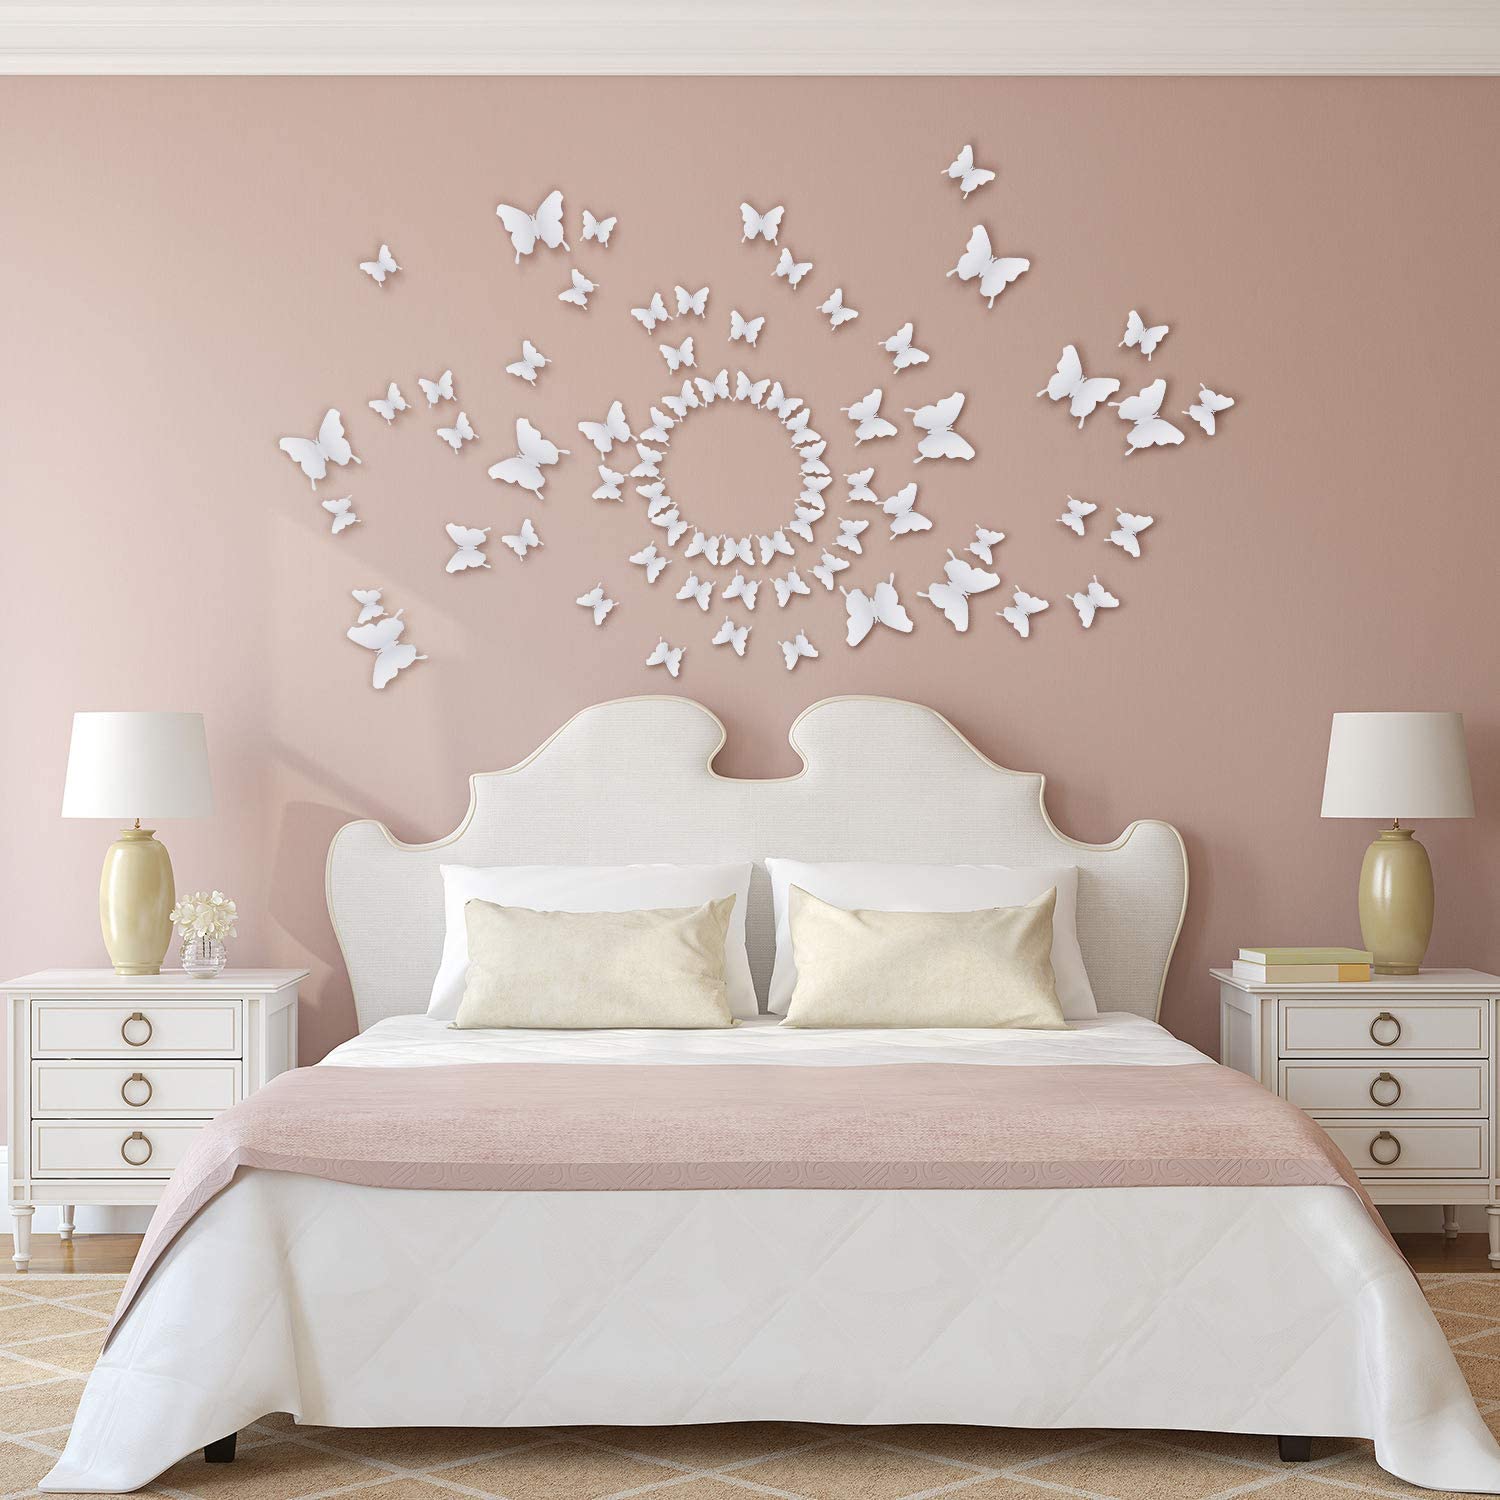 48 Pieces DIY Mirror 3D Butterfly Wall Stickers Decals (White)